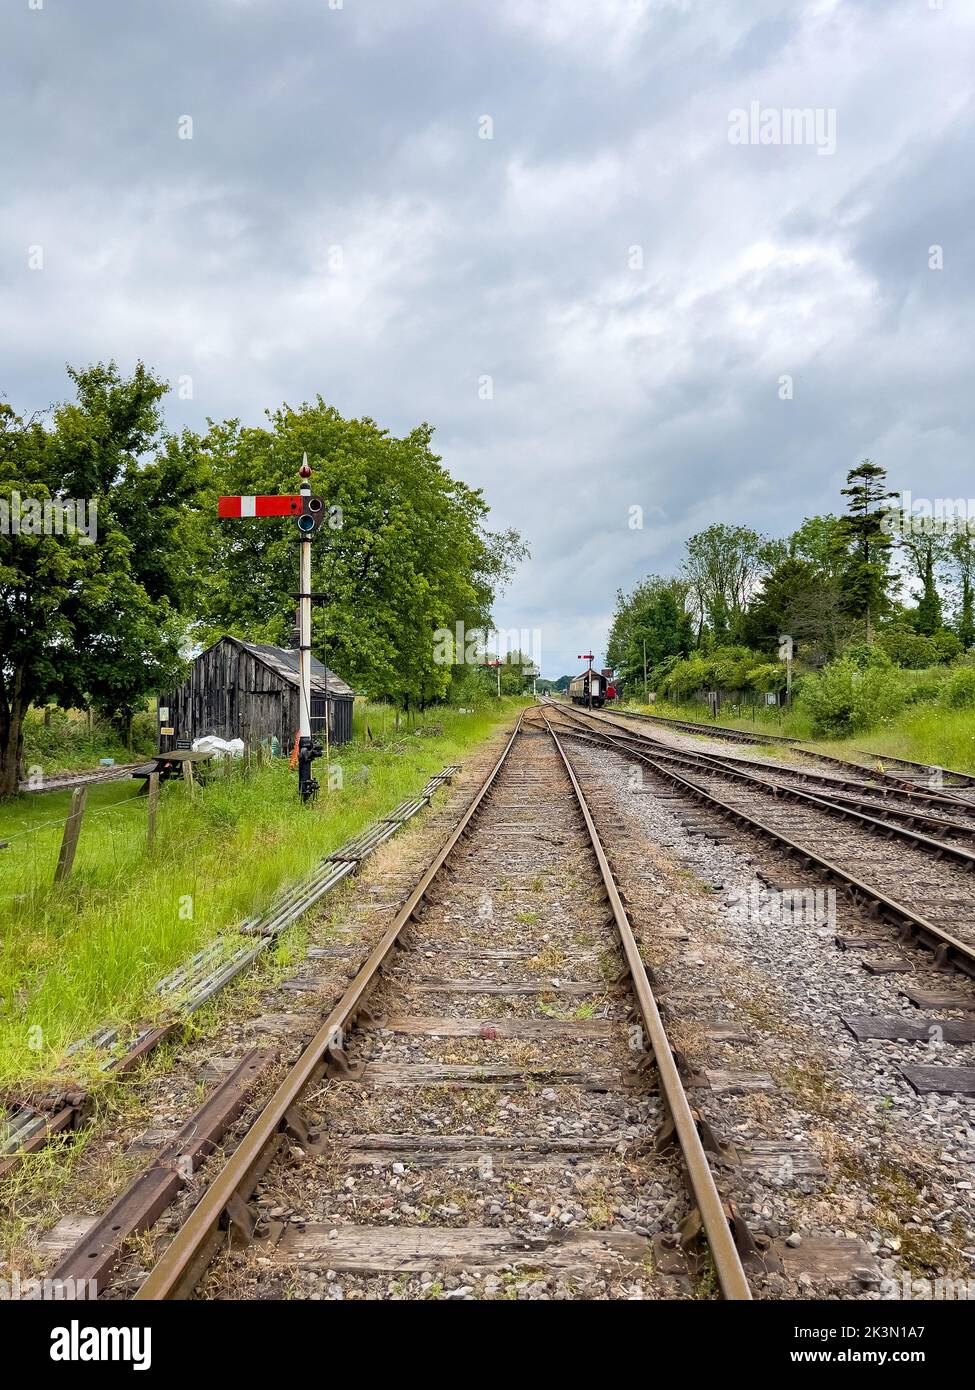 Railroad tracks passing through the countryside Stock Photo